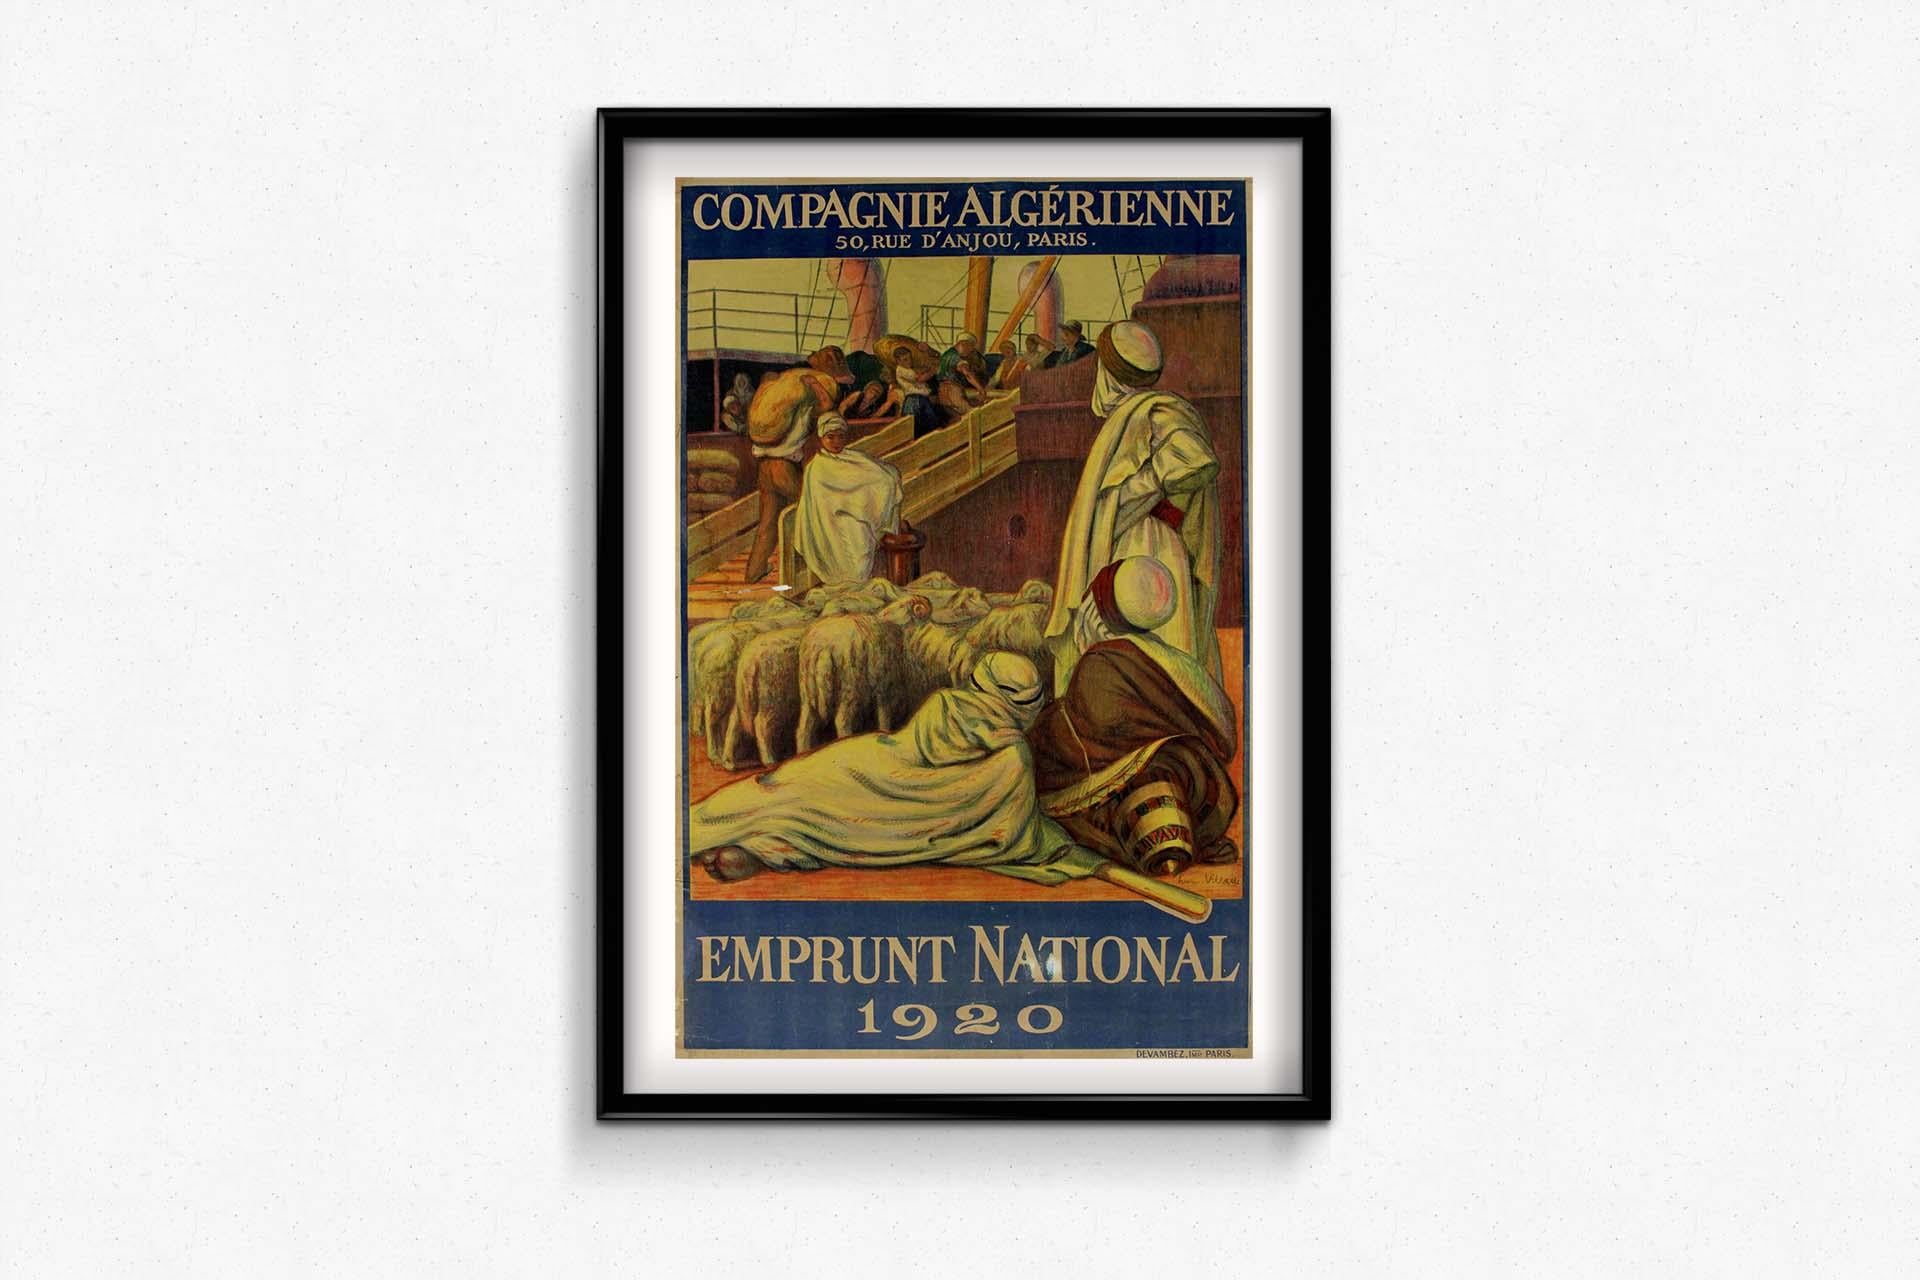 Crafted in 1920 by the skilled artist Henri Villain, the Compagnie Algérienne Emprunt National poster offers a captivating glimpse into the financial history of the time. Born in 1885, Villain was a prominent French graphic artist celebrated for his